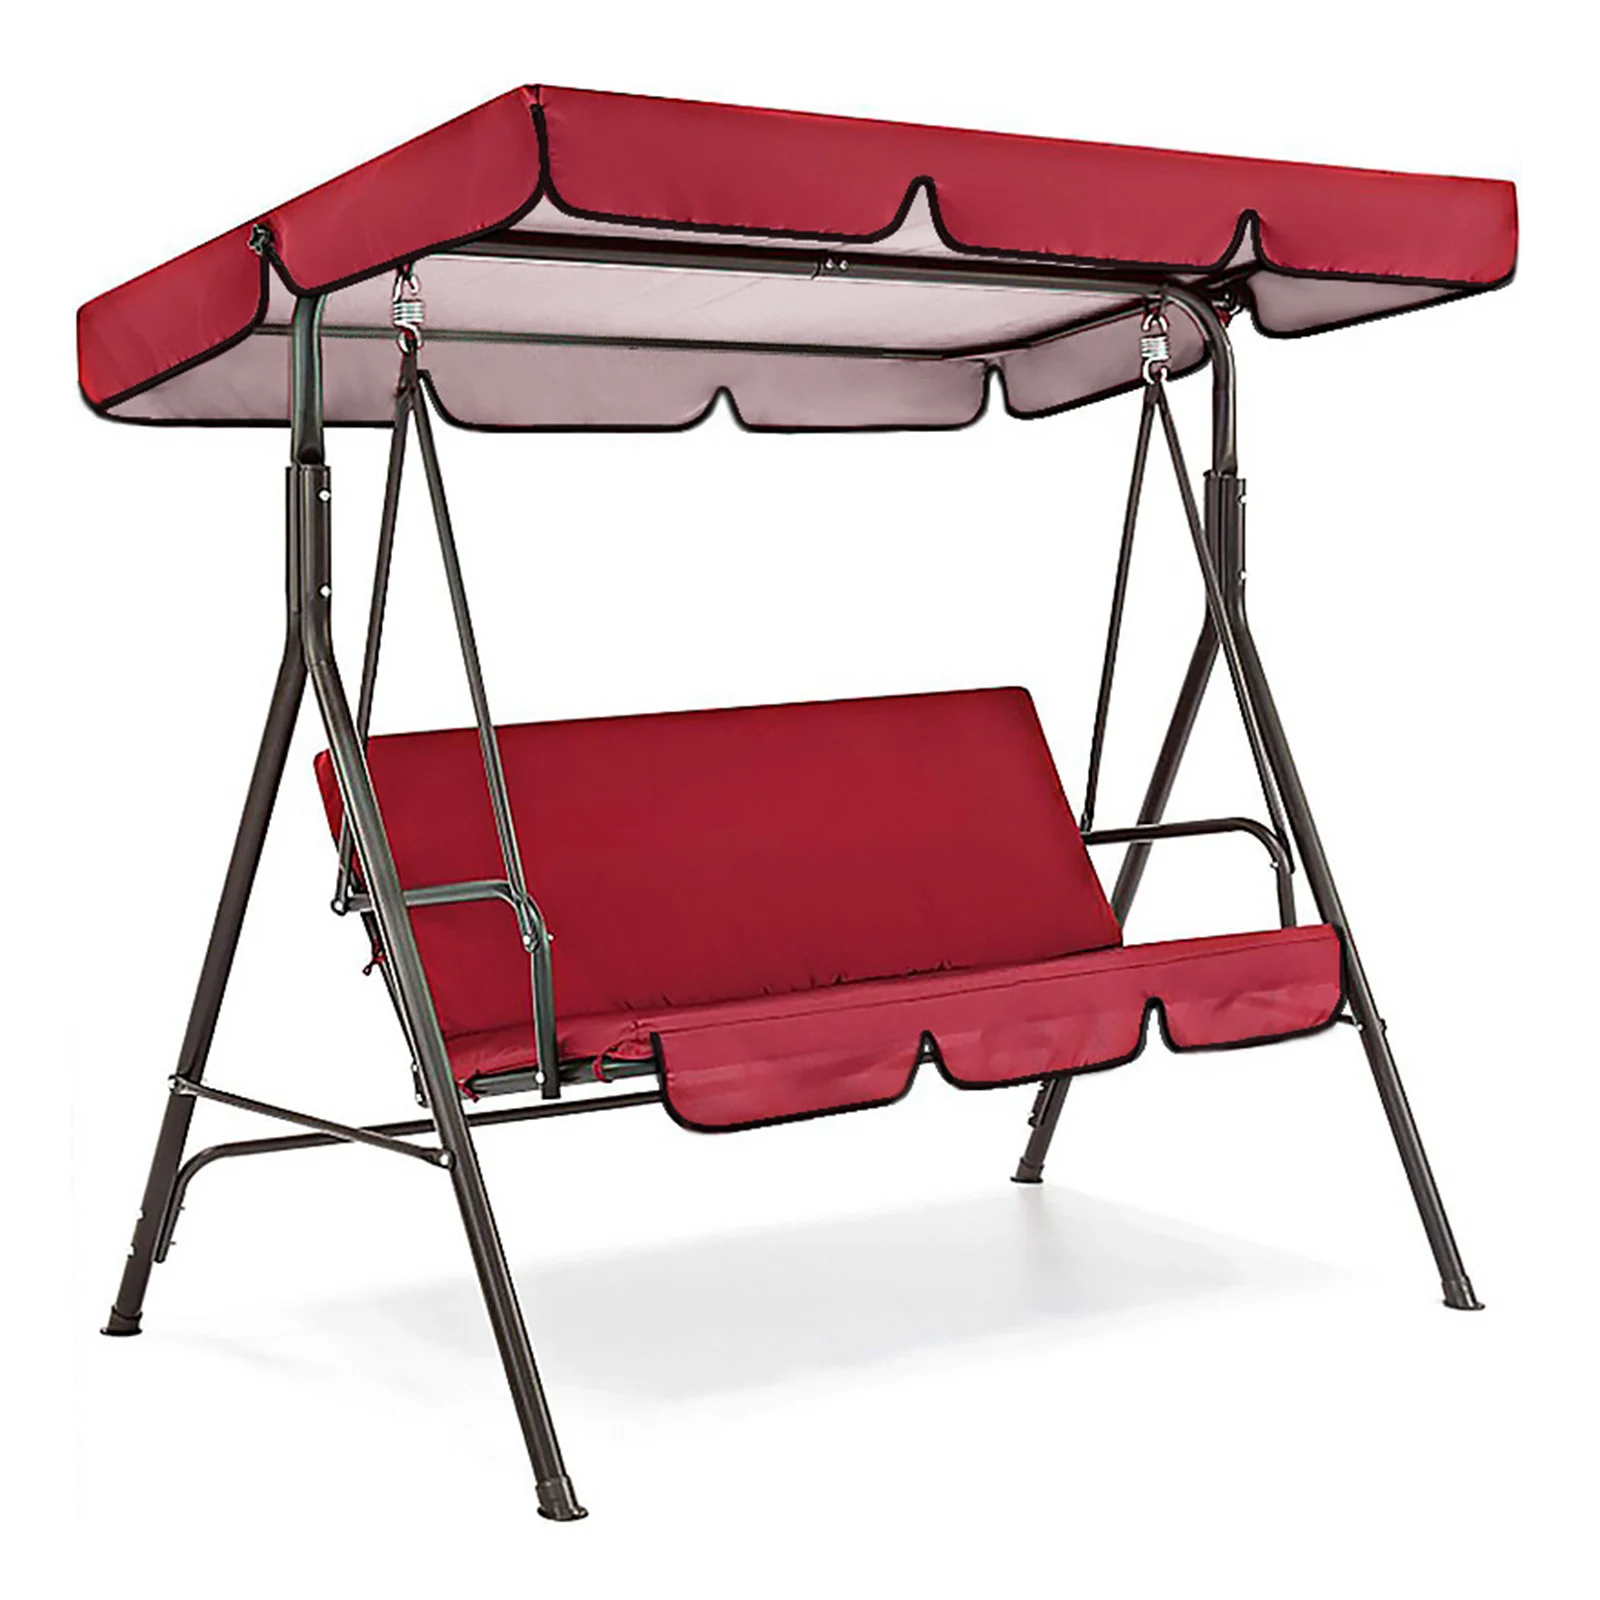 3 Seat Swing Awning Set Swing Canopy Cover and Swing Chair Cover Replacements Garden Yard Furniture Accessories Protector Cover